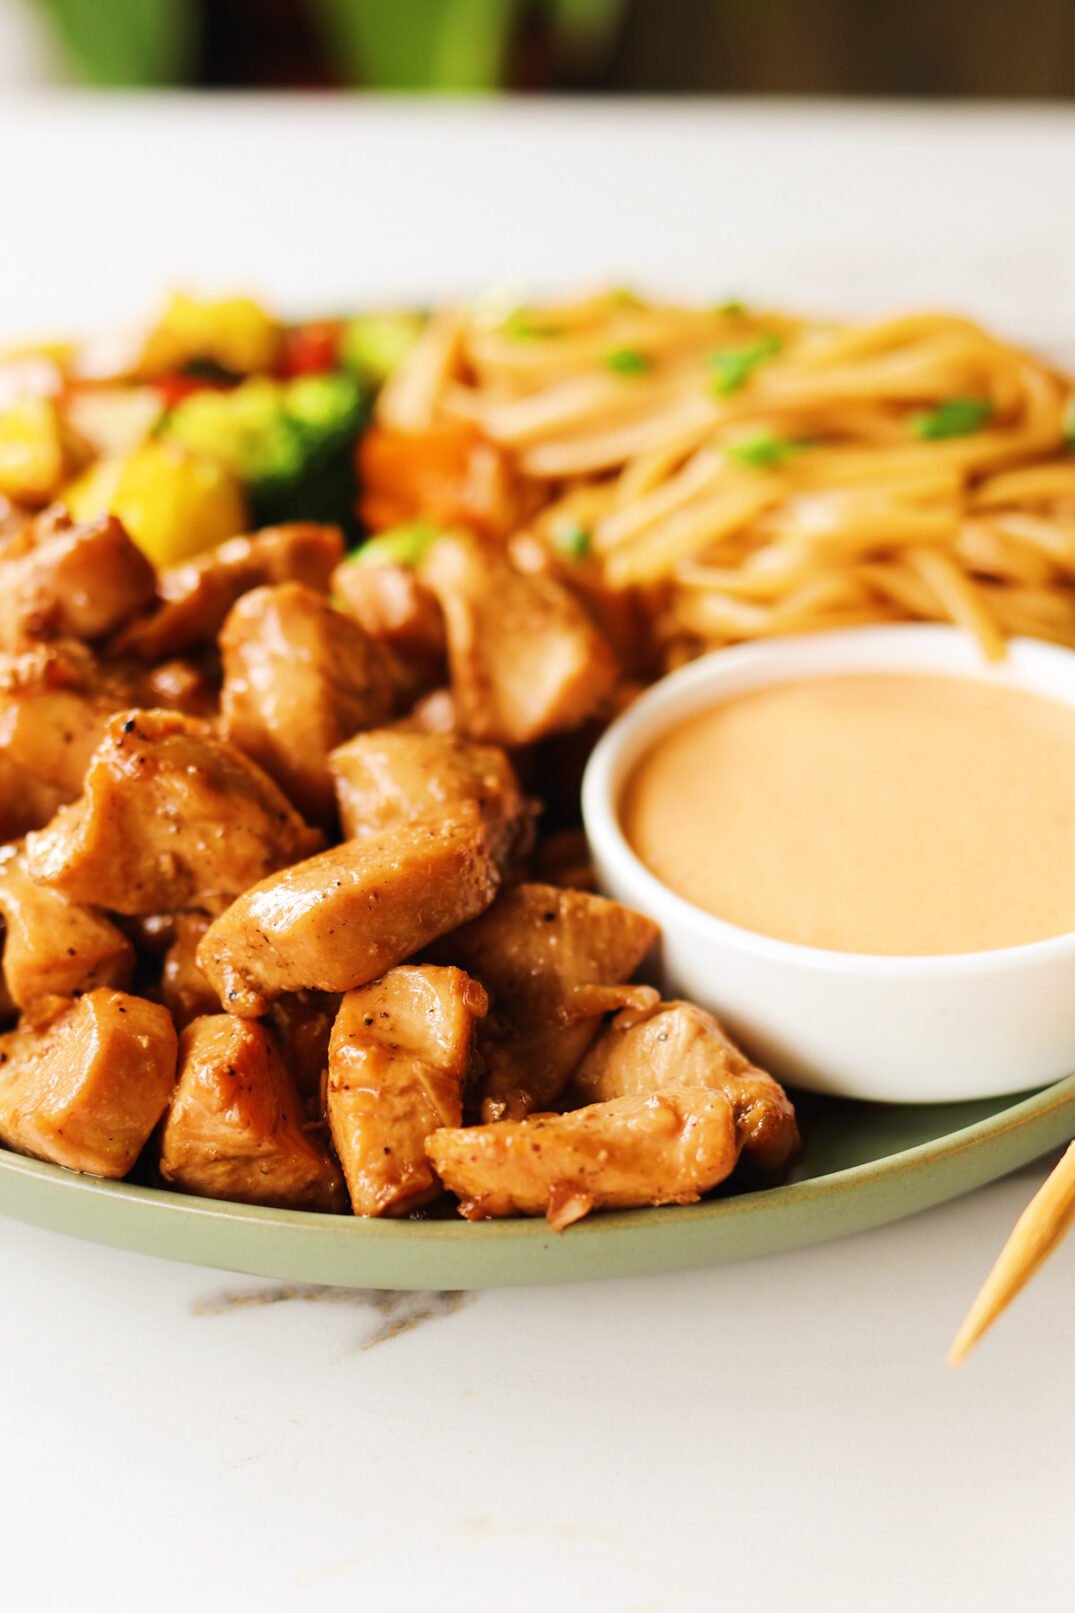 a plate of hibachi chicken with yum yum sauce on a green plate with chopsticks.